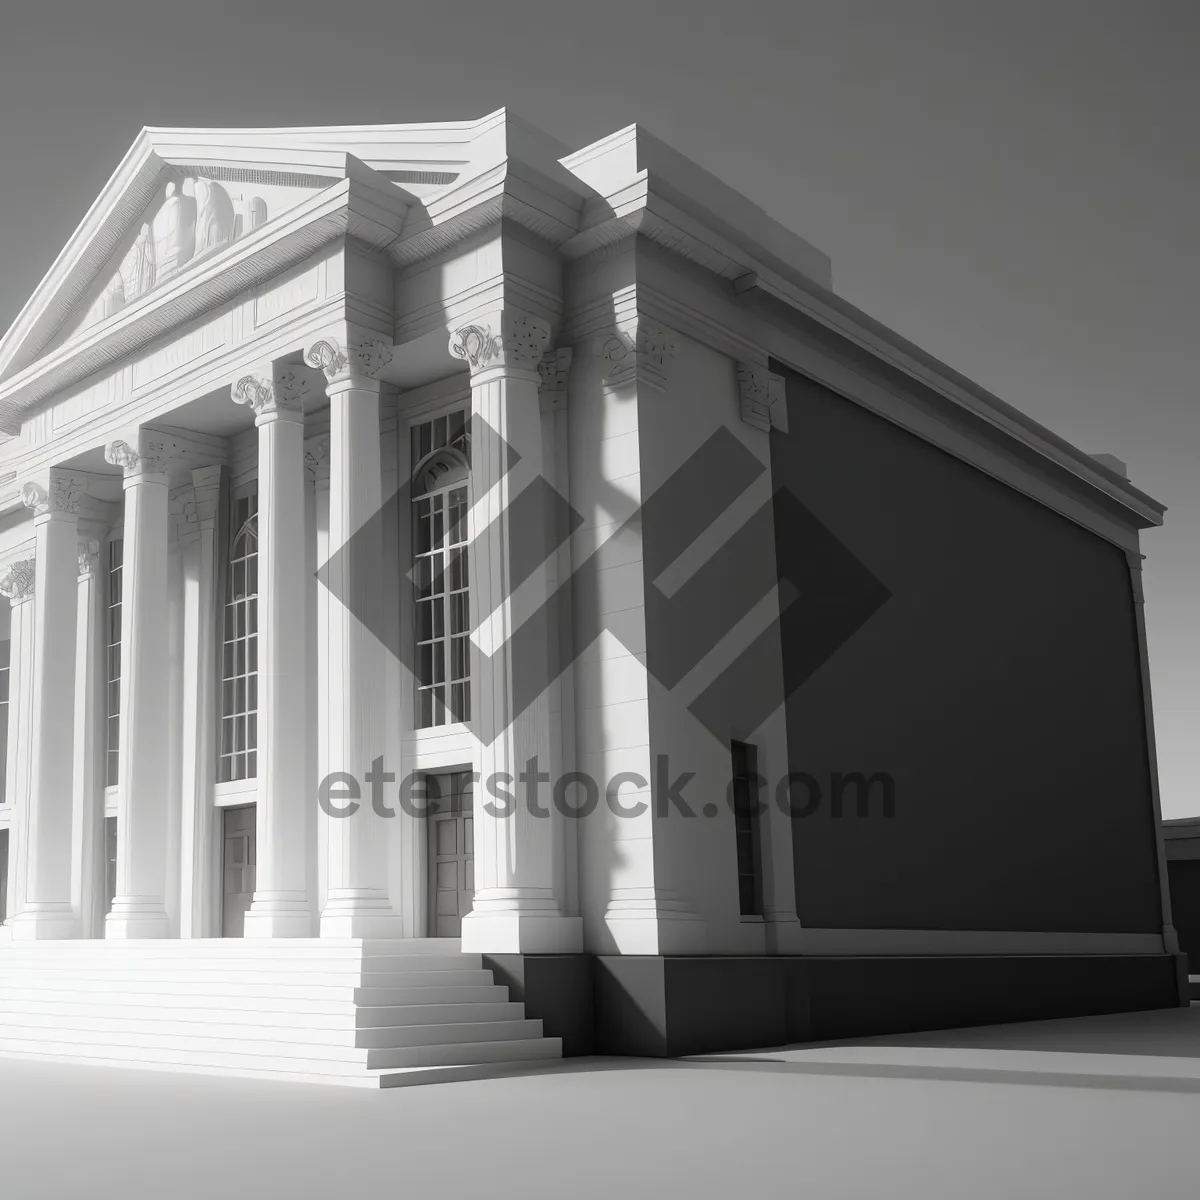 Picture of Classical stone building with majestic columns.